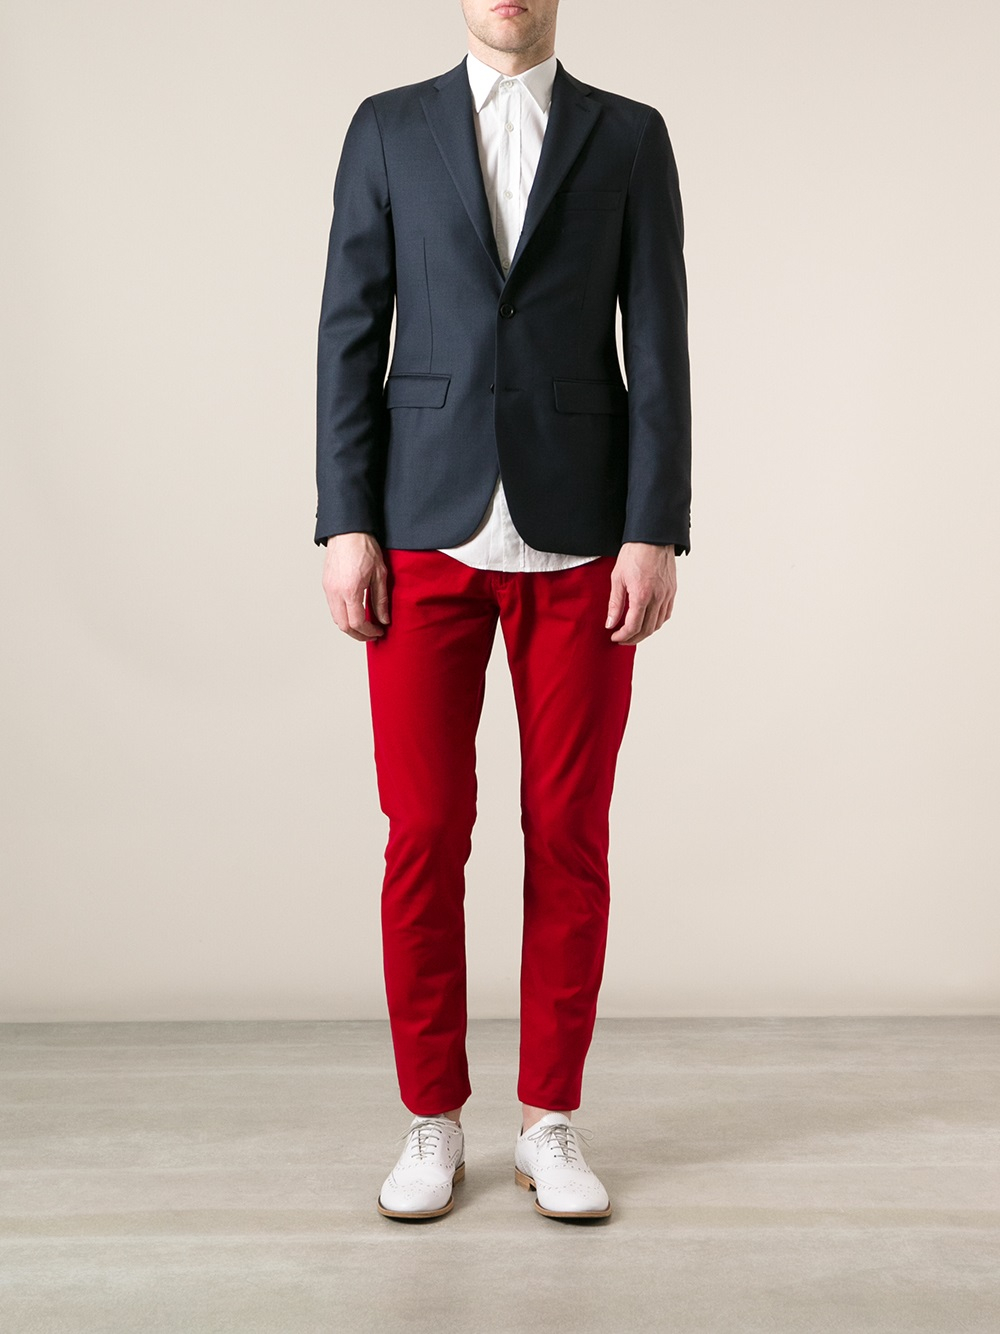 Armani Jeans Skinny Chinos in Red for Men - Lyst